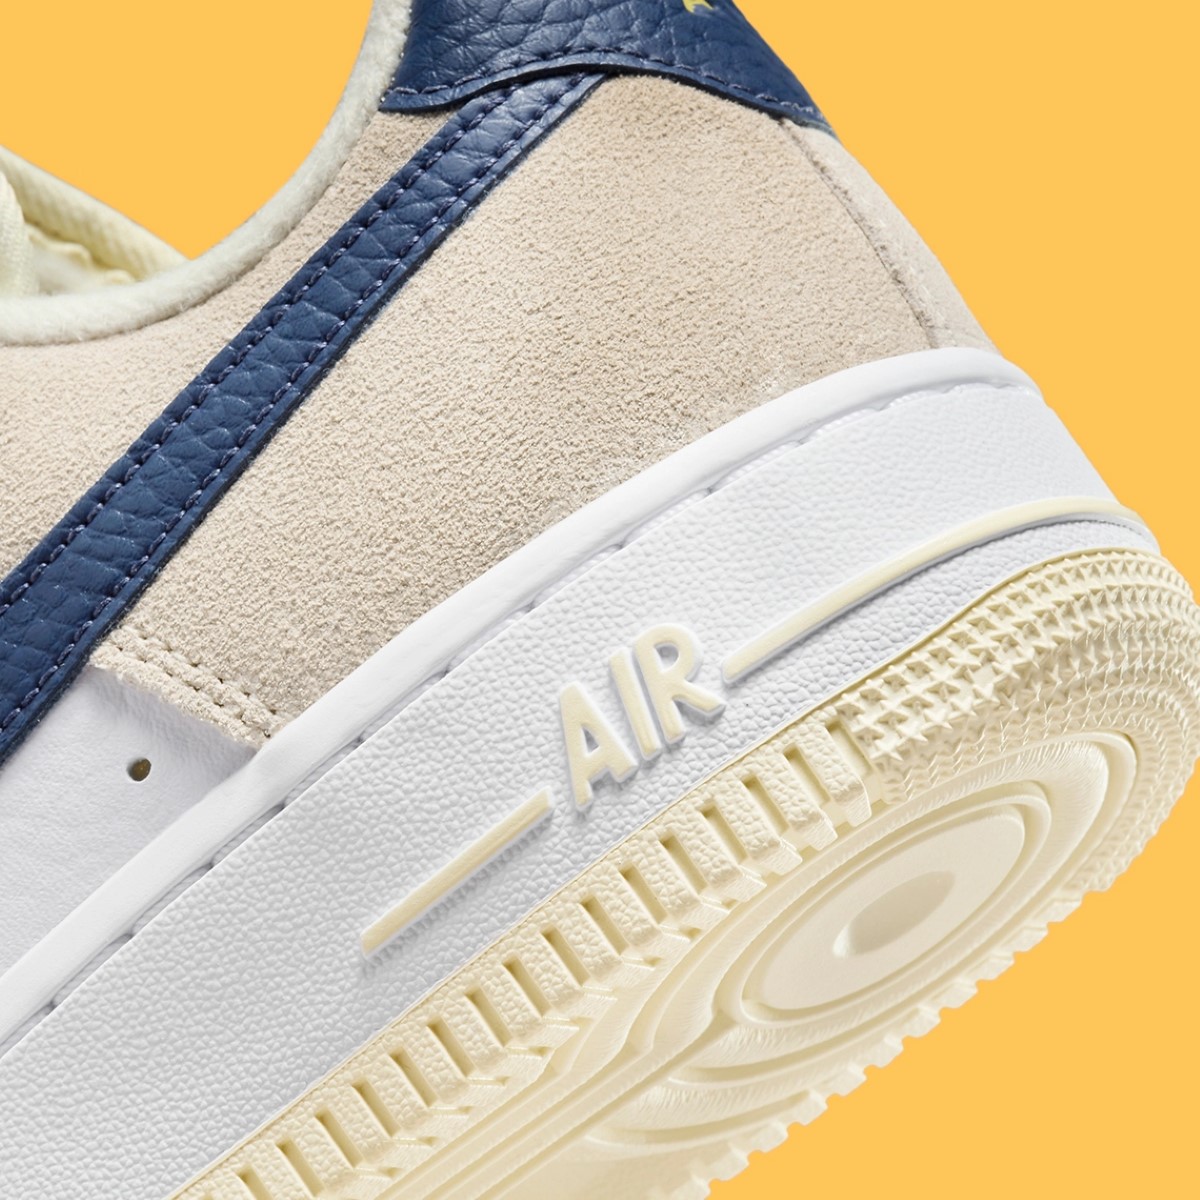 The summer-ready Nike Air Force 1 Low ''Tan/Navy''